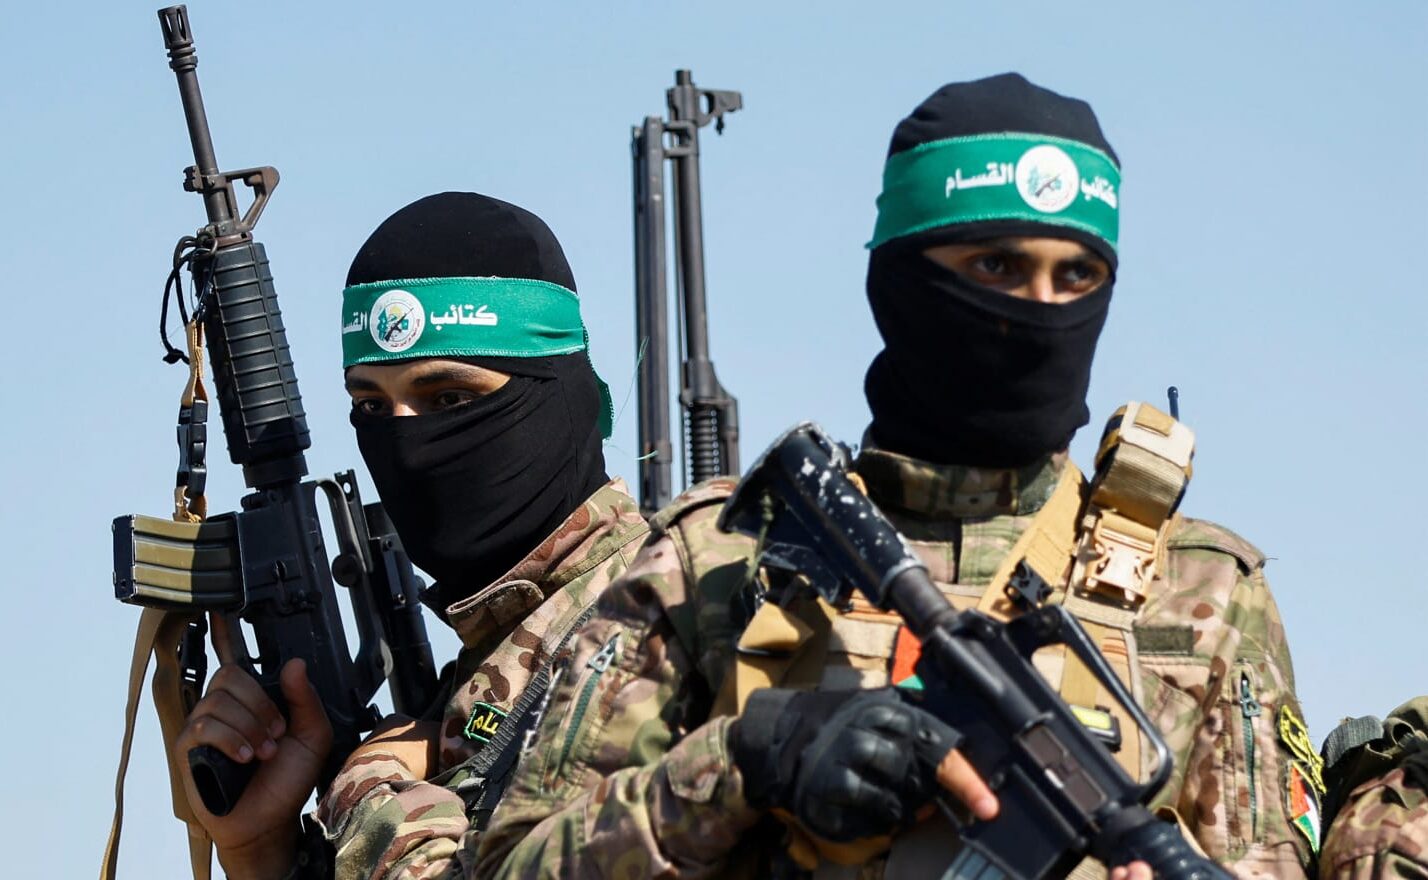 Blowback: How Israel went from helping create Hamas to bombing it